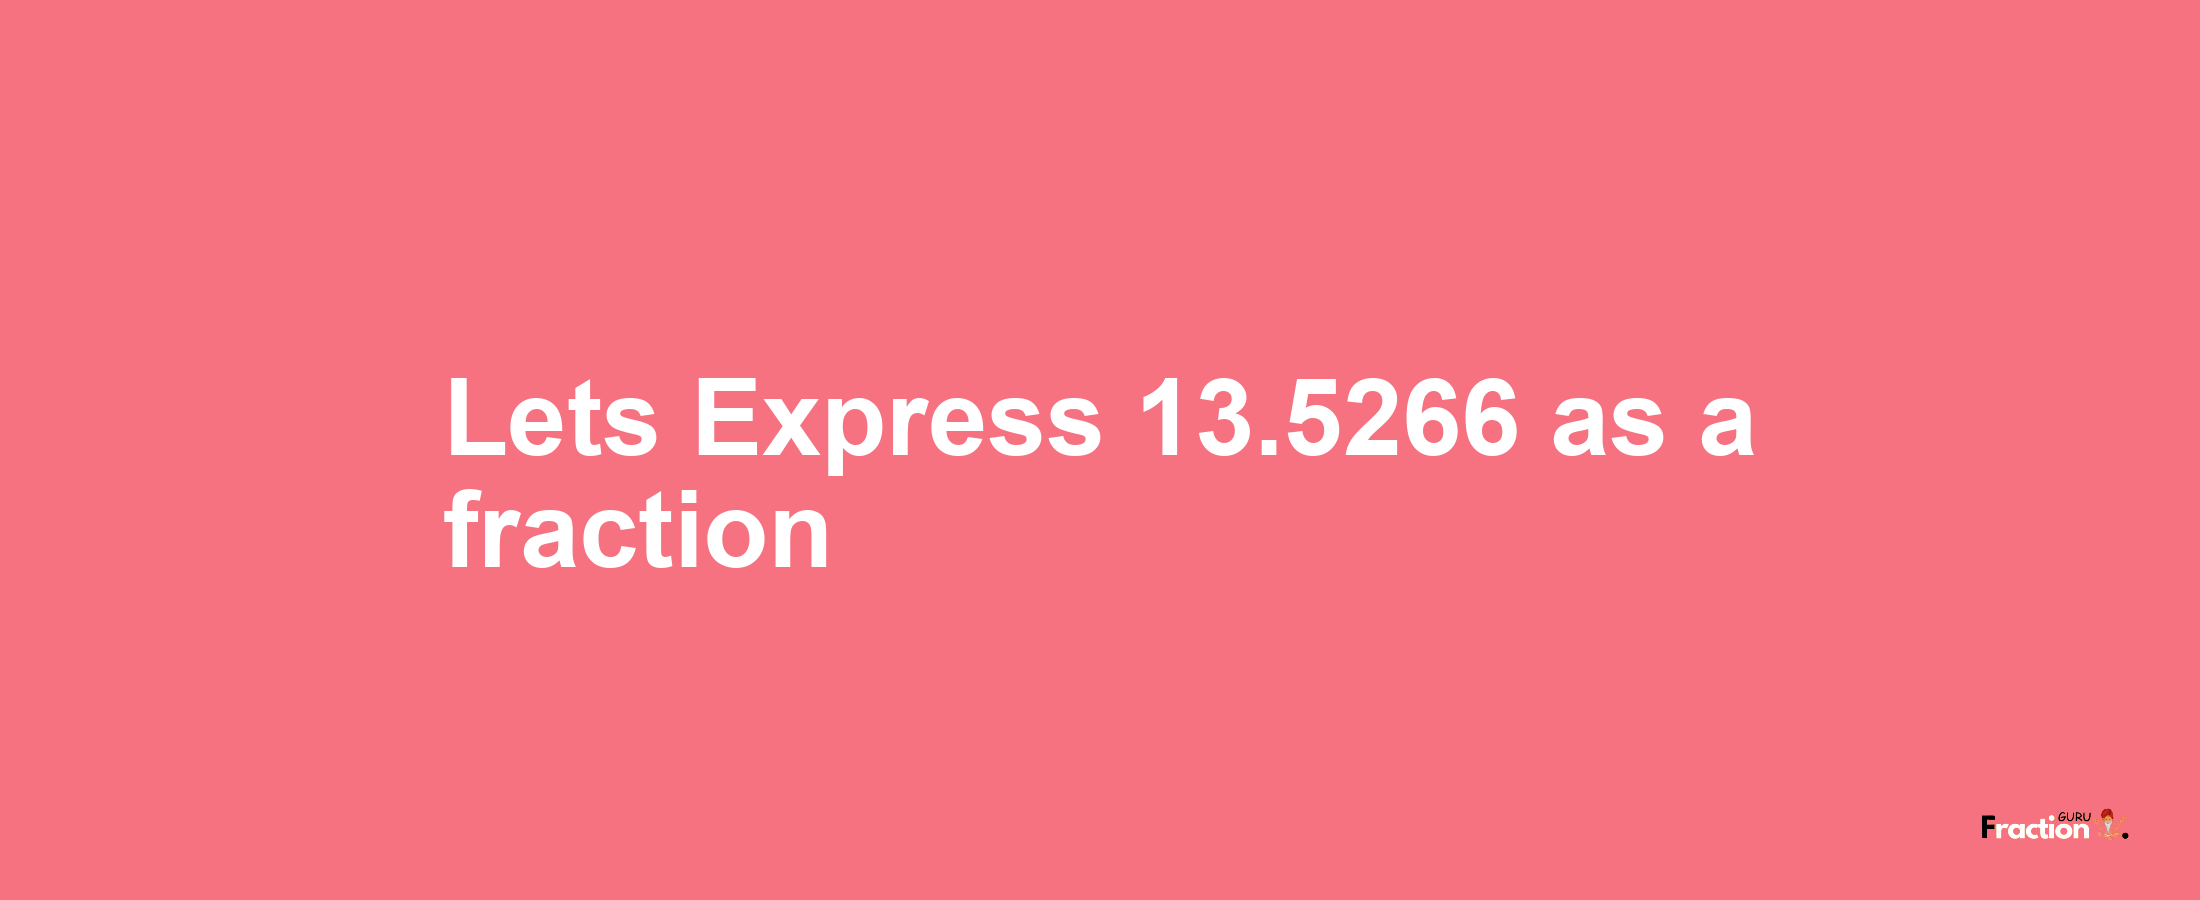 Lets Express 13.5266 as afraction